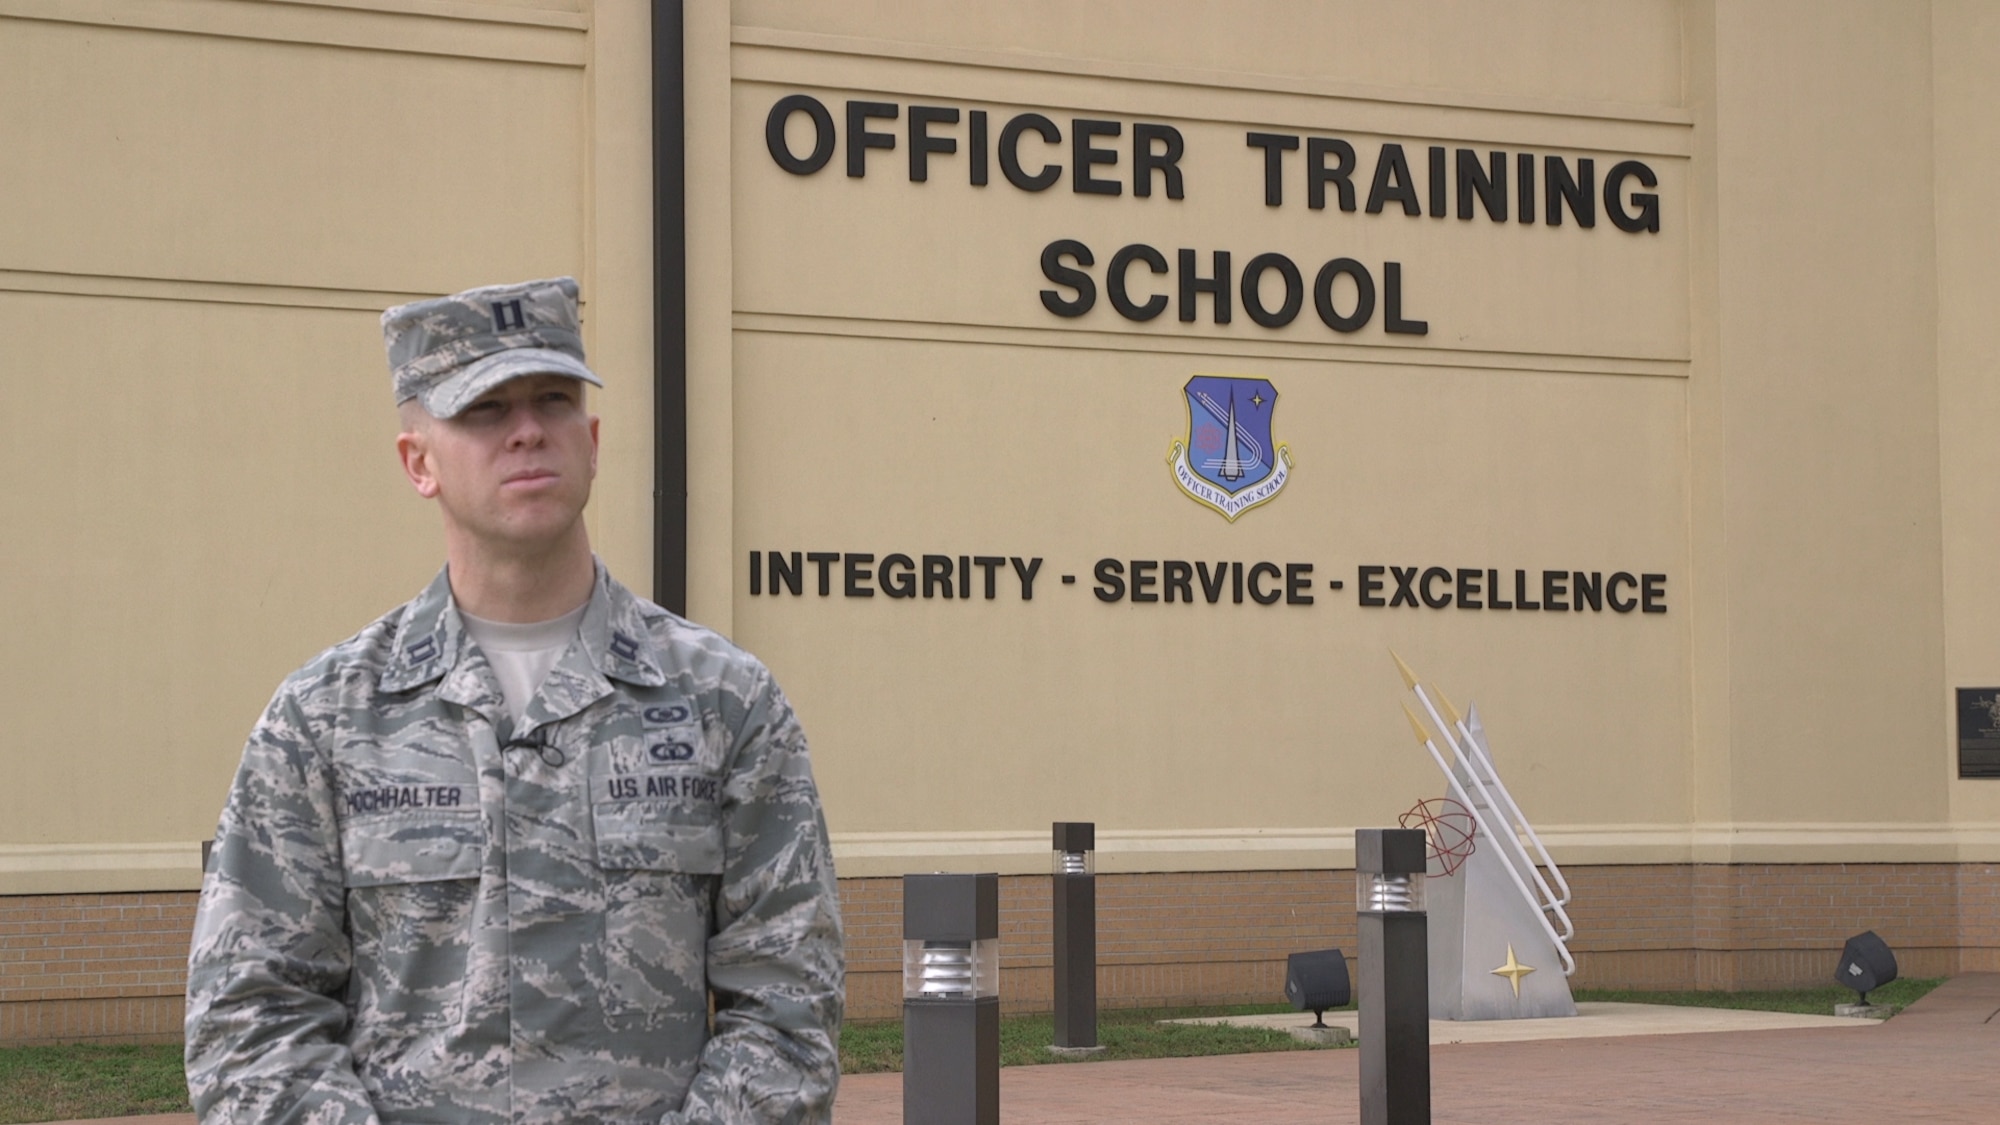 U.S. Air Force Capt. Dan Hochhalter, 24th Training Squadron member, stands  in front of the Officer Training School building on Maxwell Air Force Base, Alabama.